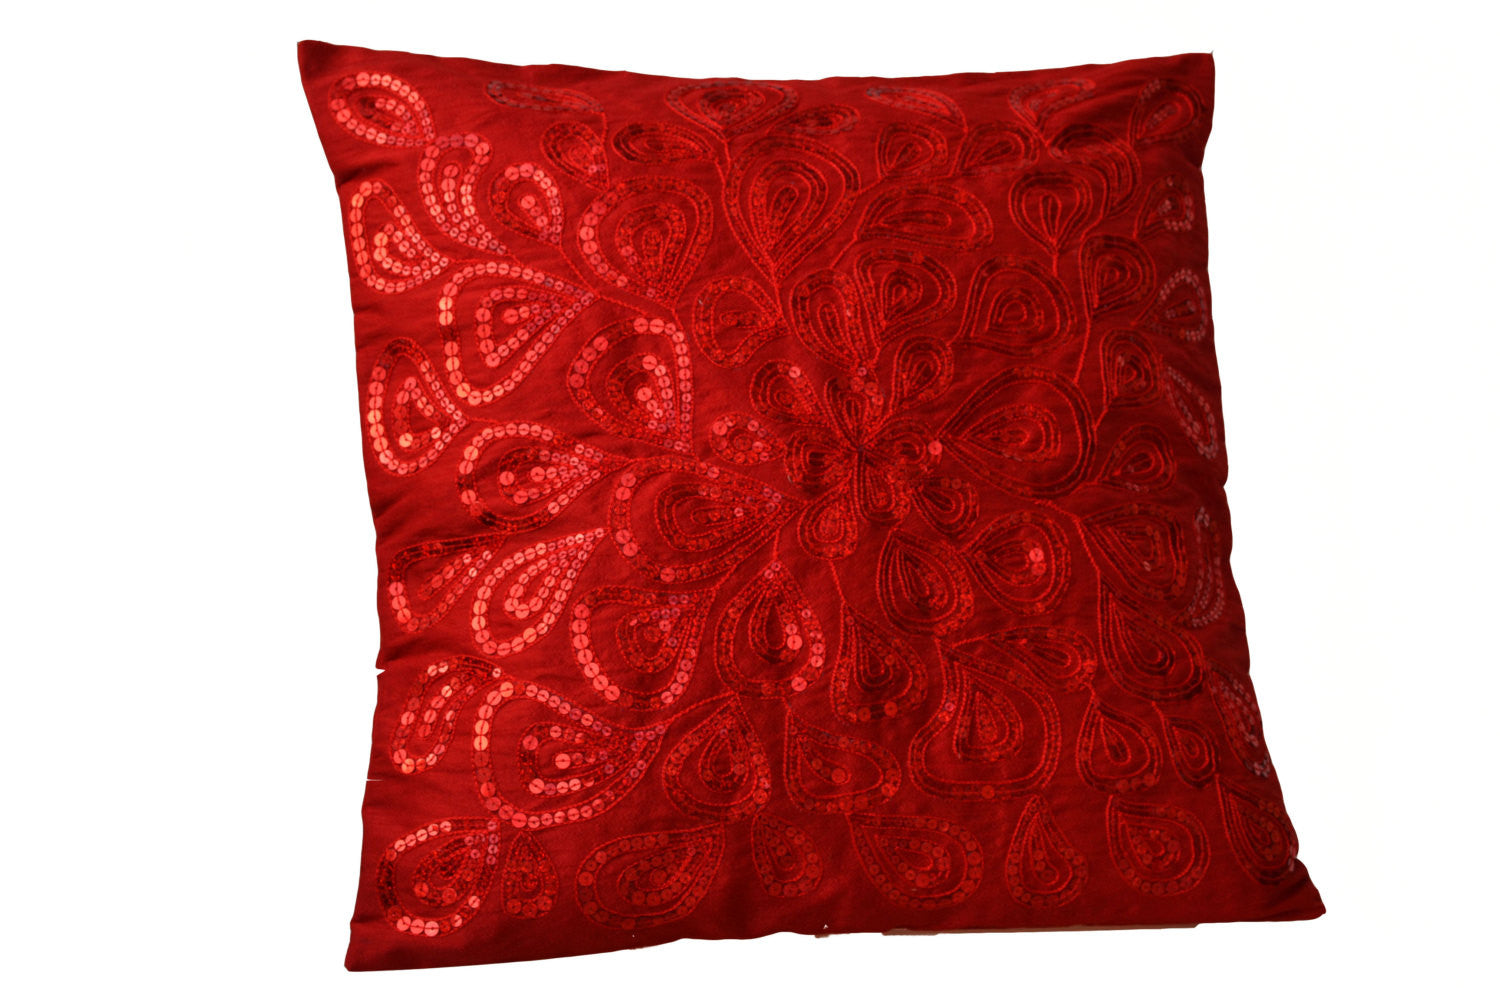 Handmade silk throw pillow cover with red sequin